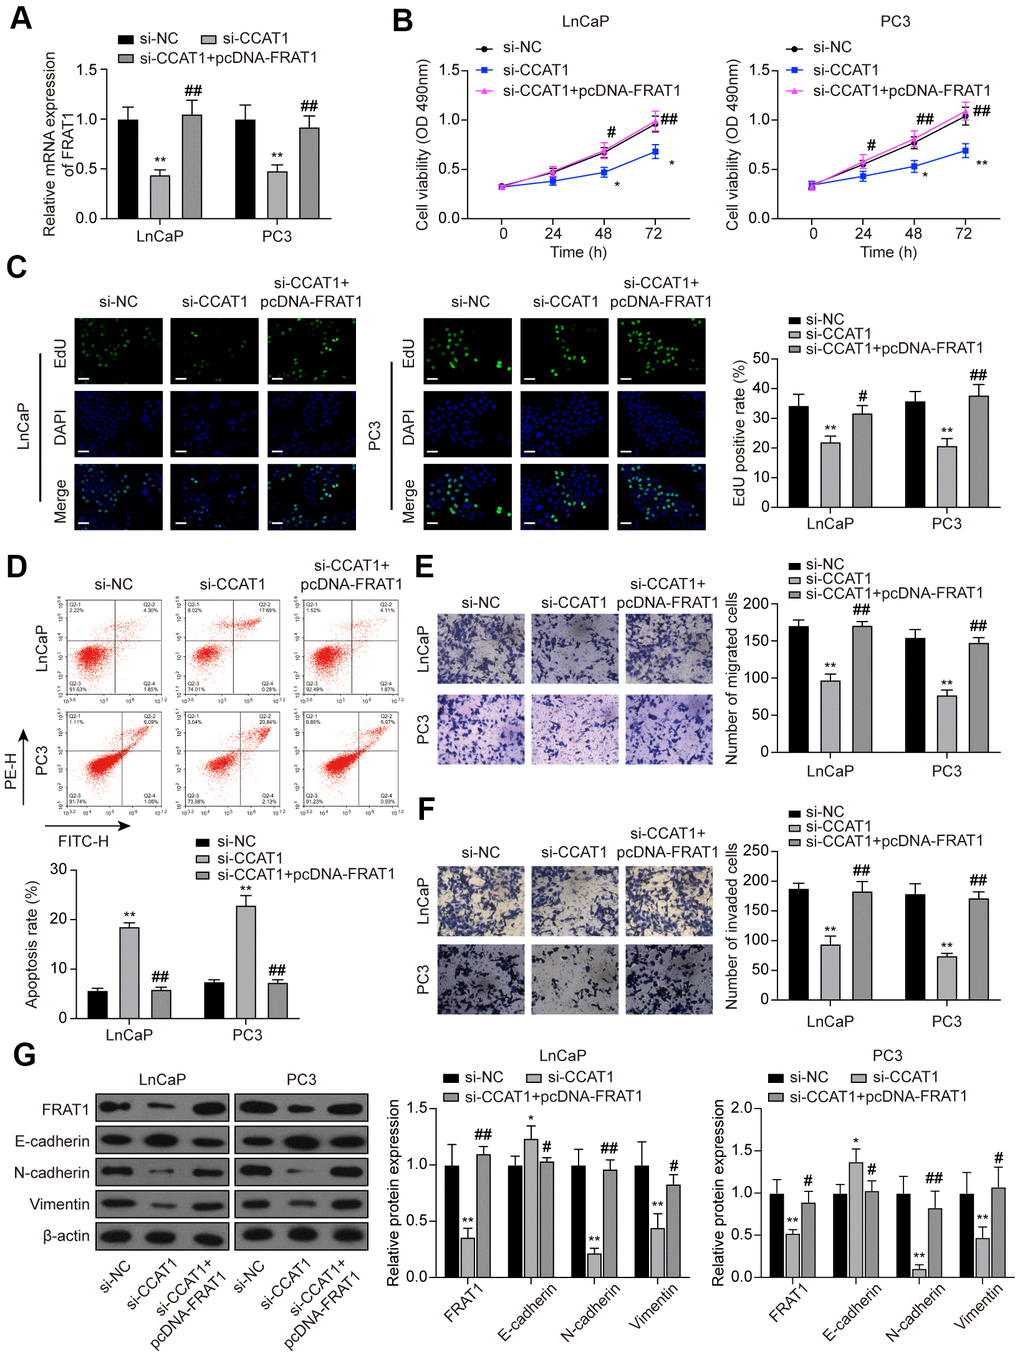 FRAT1 overexpression reversed the effects of CCAT1 suppression in PCa cells. (A) mRNA expression of FRAT1 in LnCaP and PC3 cells transfected with si-CCAT1 or si-CCAT1+pcDNA-FRAT1. (B) The results of MTT assays indicated that down-regulation of CCAT1 suppressed cell viability, and the suppressed ability was counteracted by pcDNA-FRAT1. (C) EdU staining results of LnCaP cells and PC3 cells treated with si-CCAT1 or si-CCAT1+pcDNA-FRAT1. Scale bar: 50 μm. (D) Flow cytometry detection of the cell apoptosis changes in LnCaP cells and PC3 cells treated with si-CCAT1 or si-CCAT1+pcDNA-FRAT1. (E, F) Cell migration and invasion were reduced with si-CCAT1 transfection, and recovered by overexpressing FRAT1. (G) Protein expression of FRAT1, E-cadherin, N-cadherin, and Vimentin in PCa cells were detected by western blot. *P P P P 